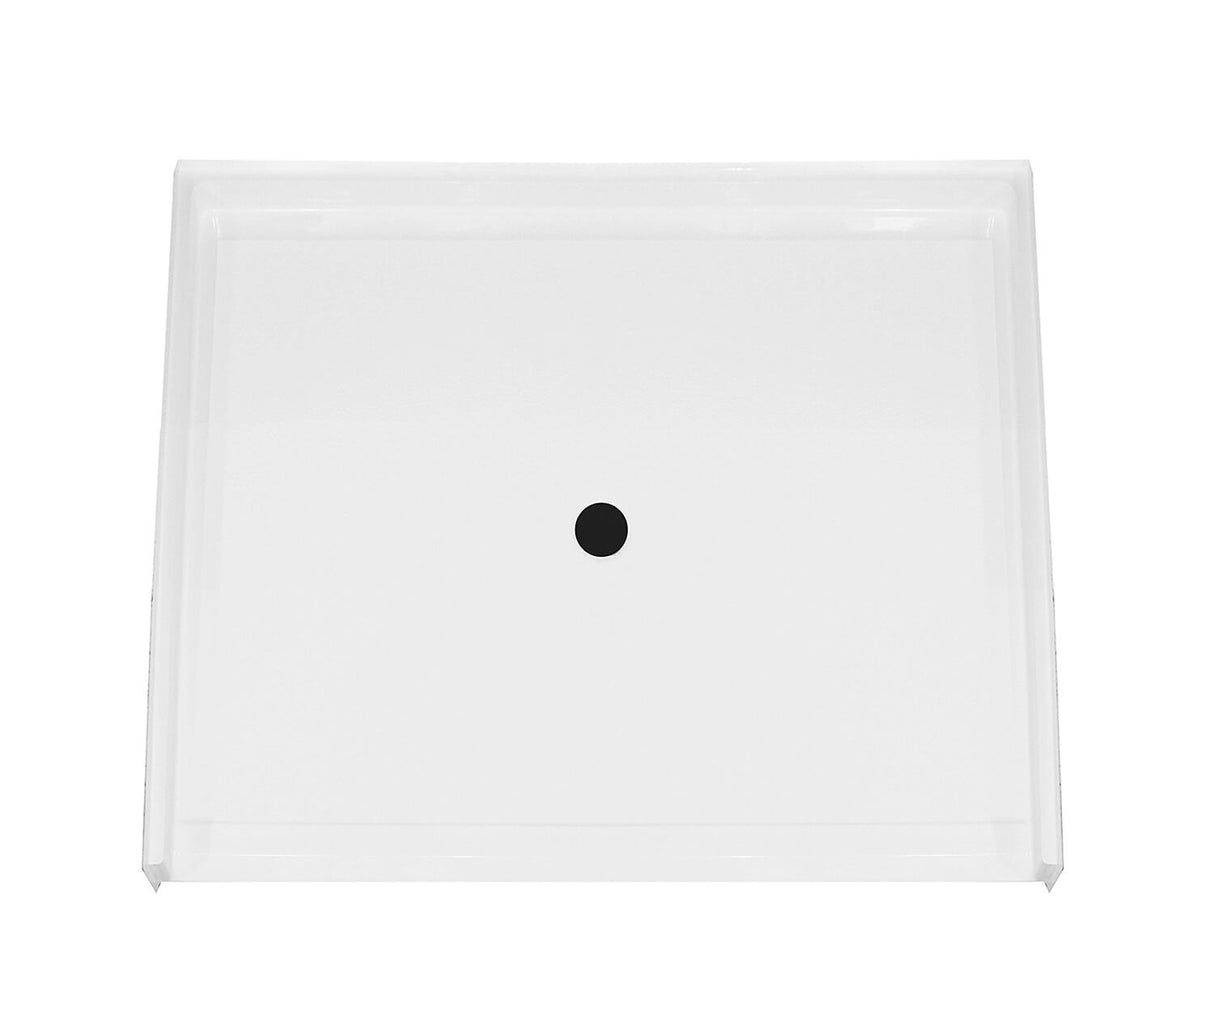 MAAX 106553-000-002-000 MX QSI-3838-BF 0.5 in. AcrylX Alcove Shower Base with Center Drain in White